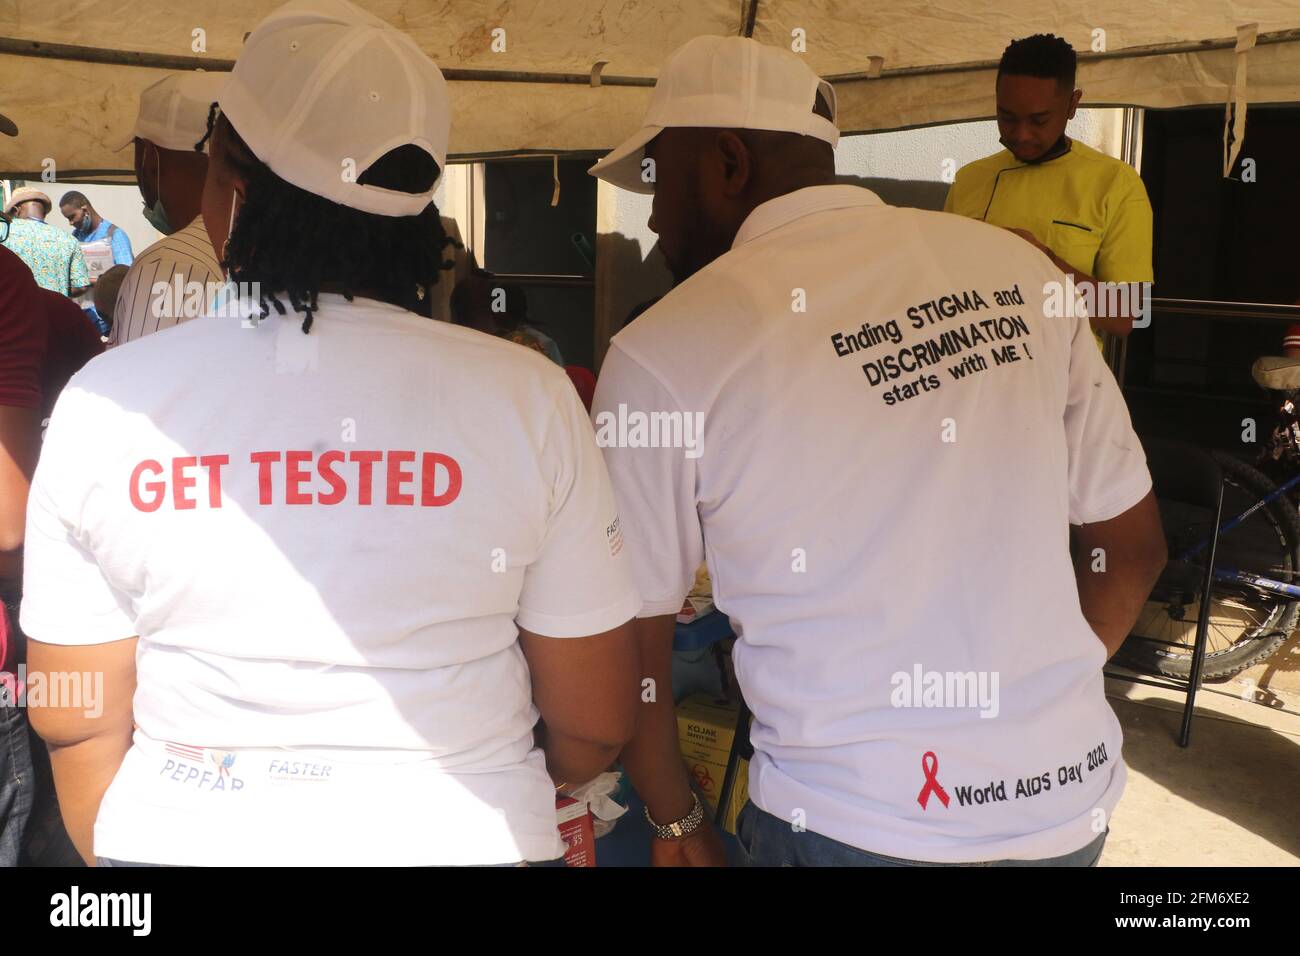 Health workers at work on HIV/AIDS testing on International Workers Day. International Workers Day is celebrated on every May 1, across the World, and it is observed to spread awareness among people, regarding the rights of workers and to mark their achievements. Lagos, Nigeria. Stock Photo